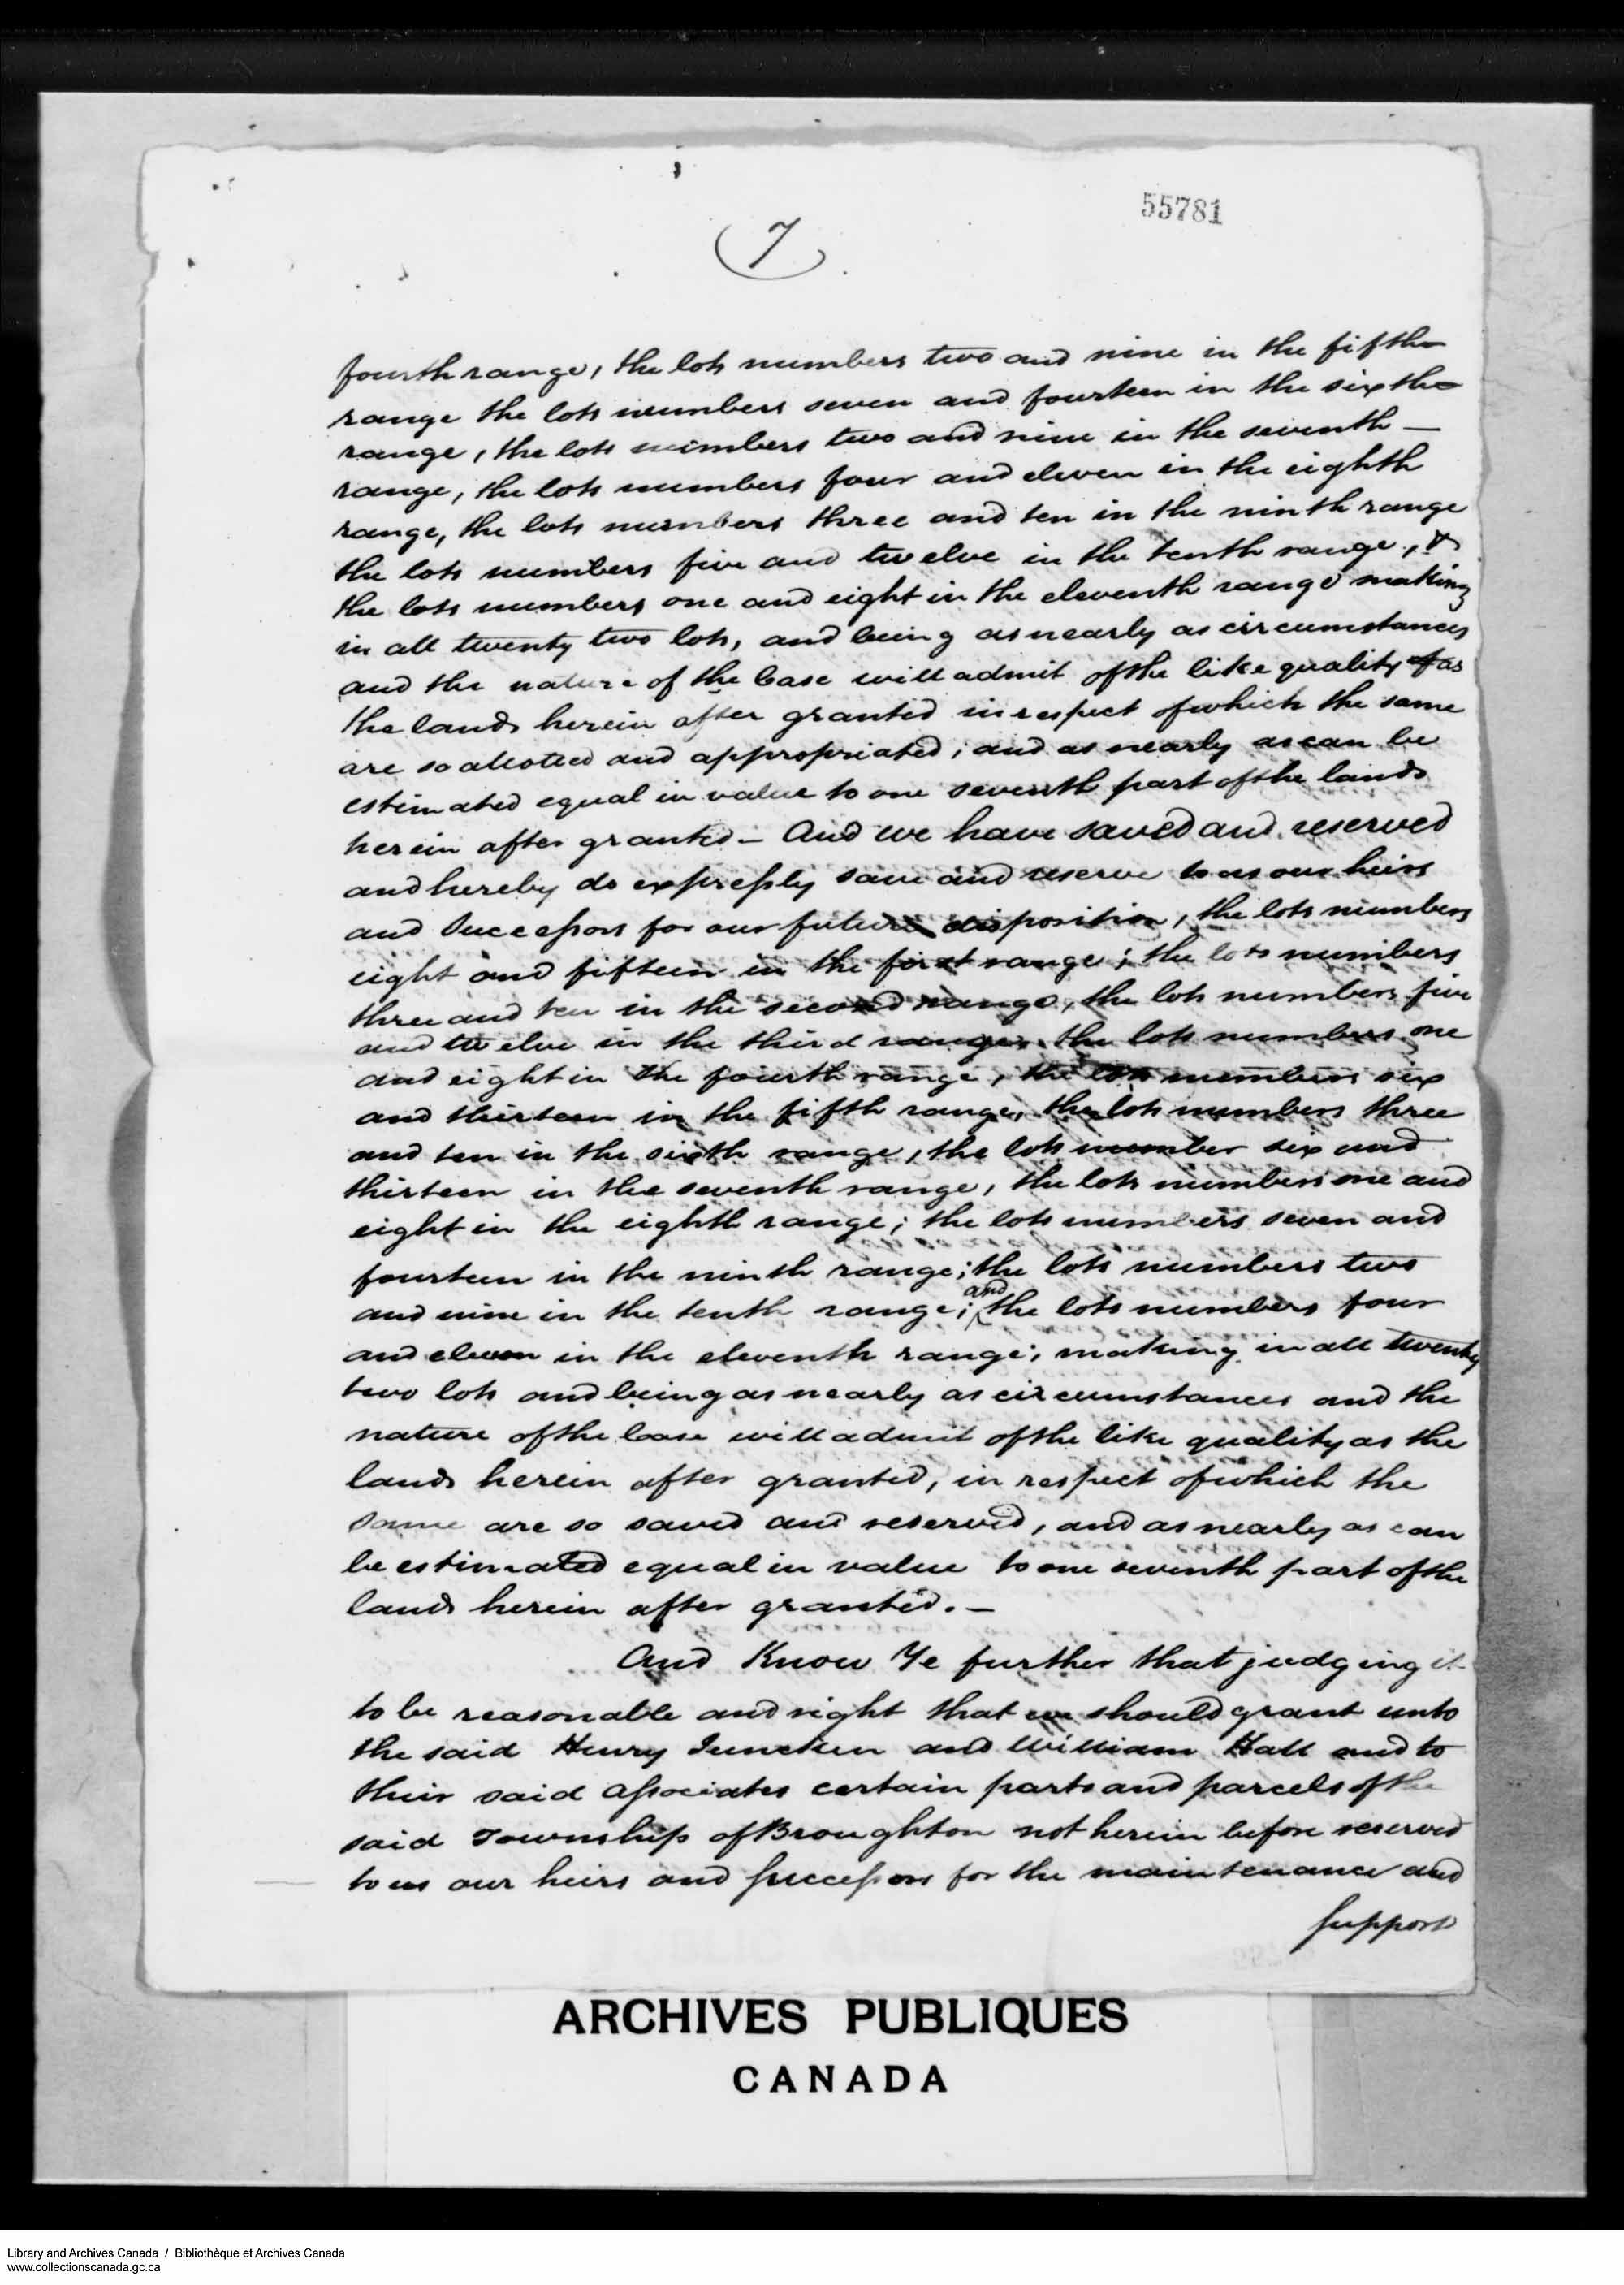 Digitized page of  for Image No.: e008700269